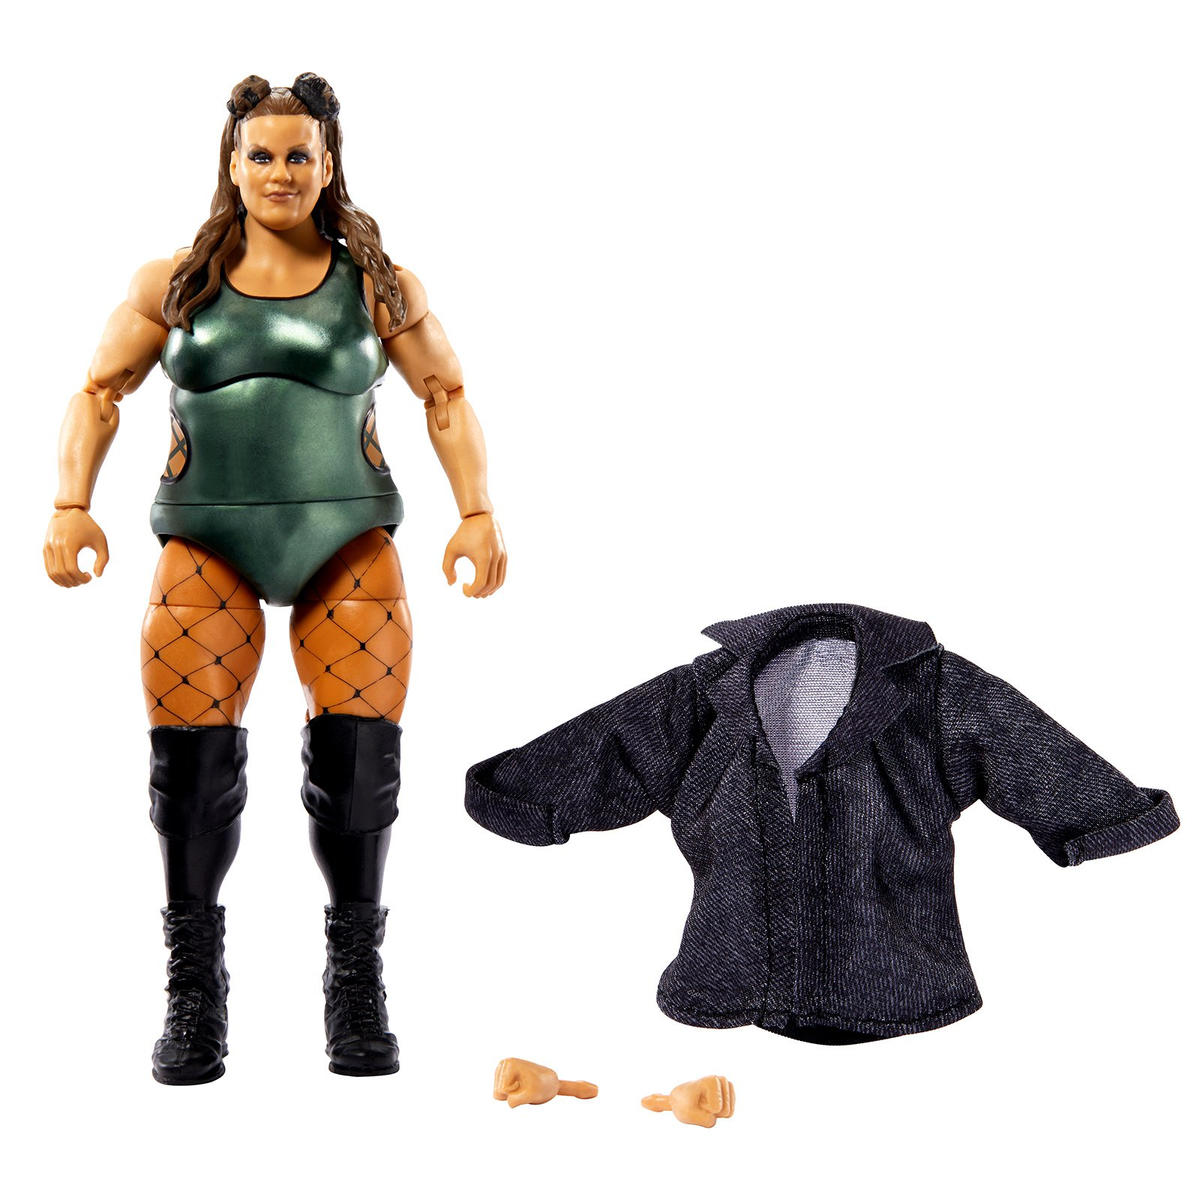 2022 WWE Mattel Elite Collection Series 96 Doudrop [Chase]